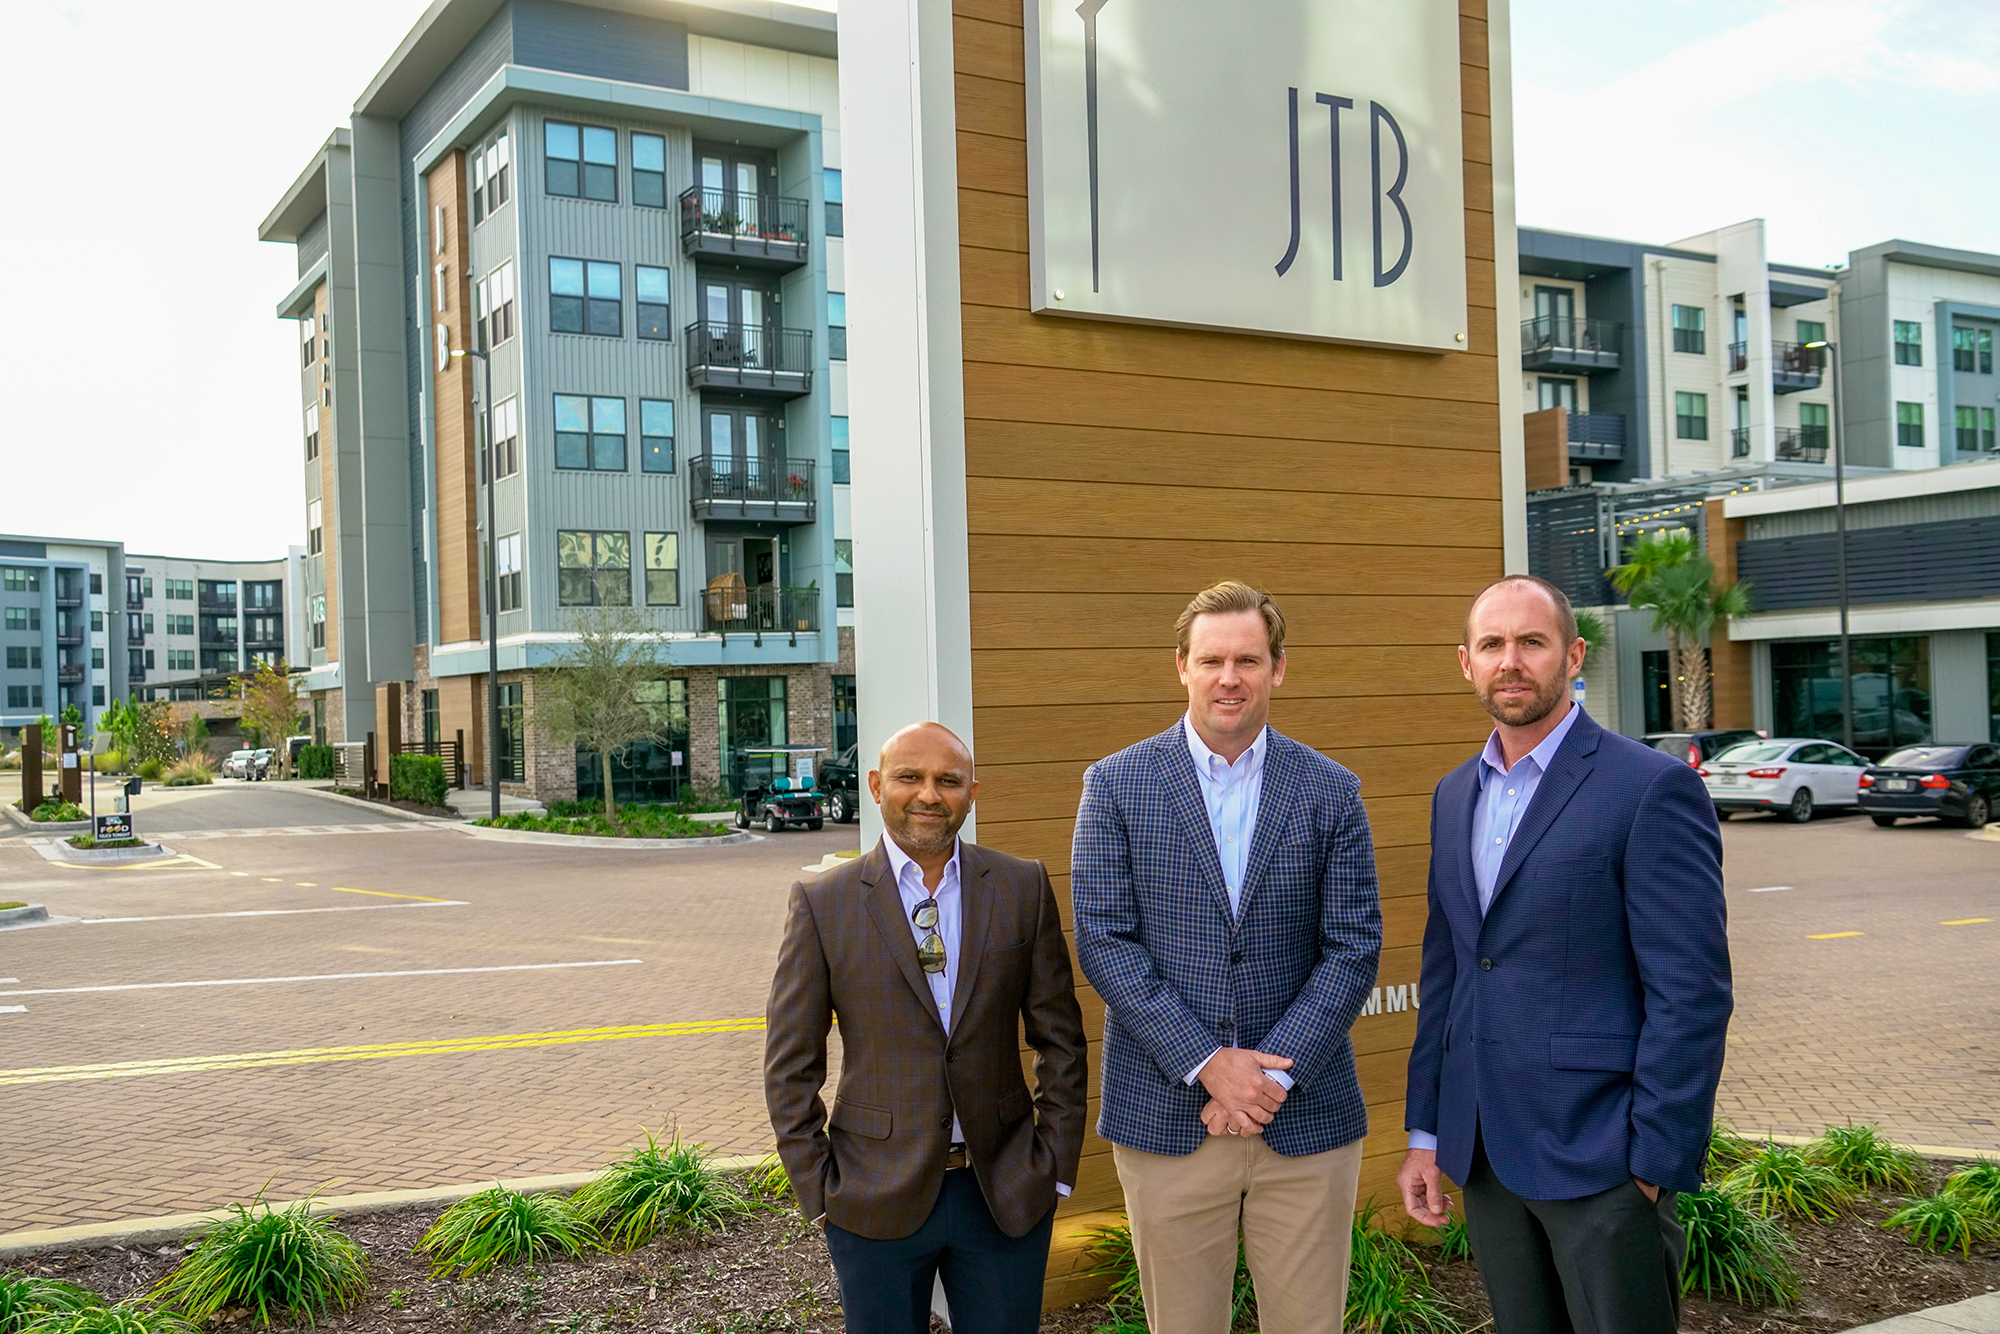 Dhaval Patel, Brian Moulder and Bobby Gatling of Walker & Dunlop in front of JTB Apartments on AC Skinner Parkway, which they sold for $83.25 million.